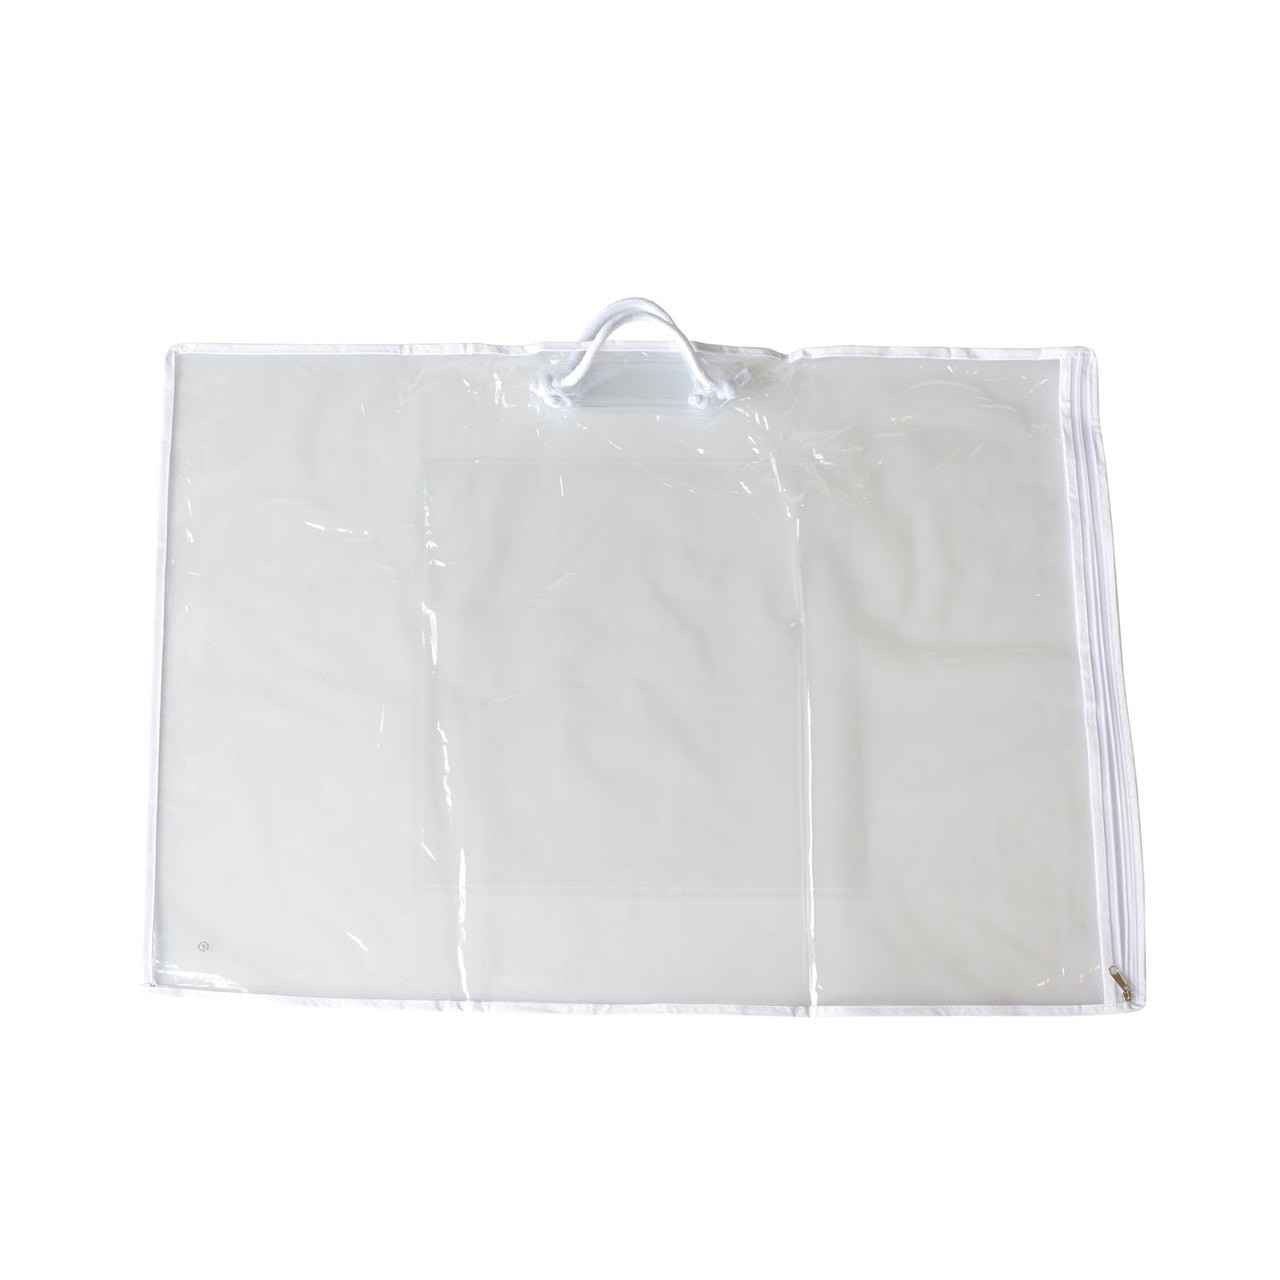 White Blanket / Pillow Storage Bag With Side Zipper